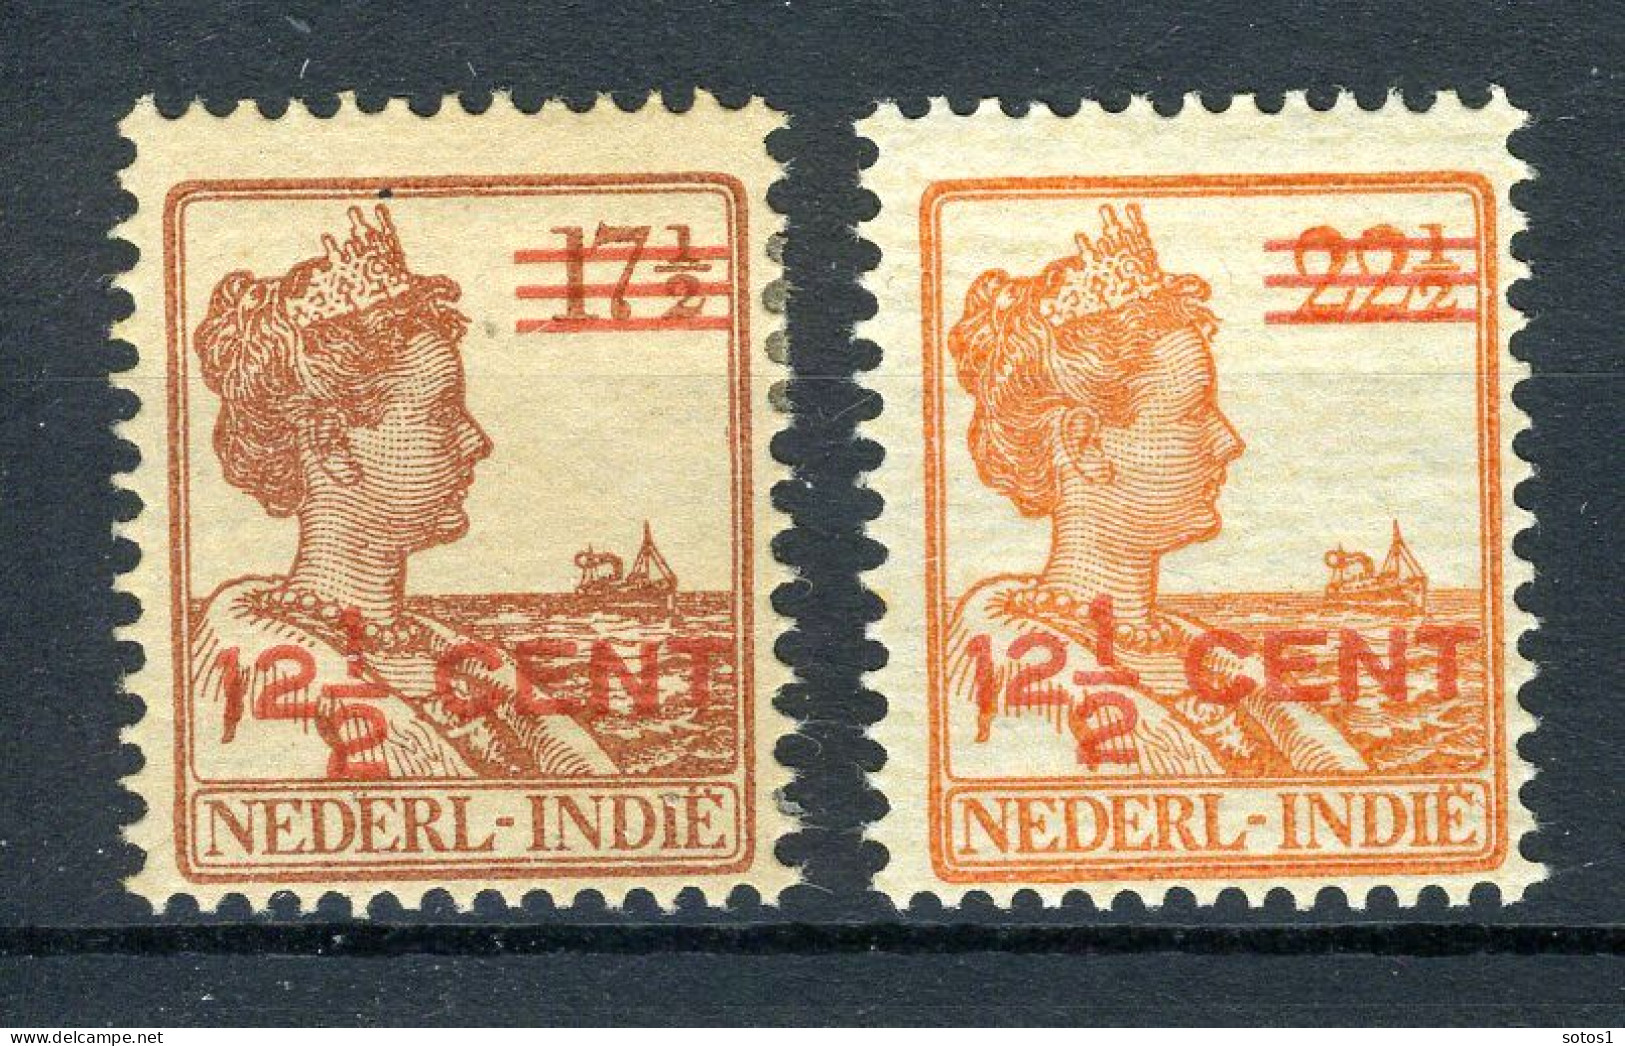 NL. INDIE 142/143 MH 1921-1922 - Hulpuitgifte - India Holandeses